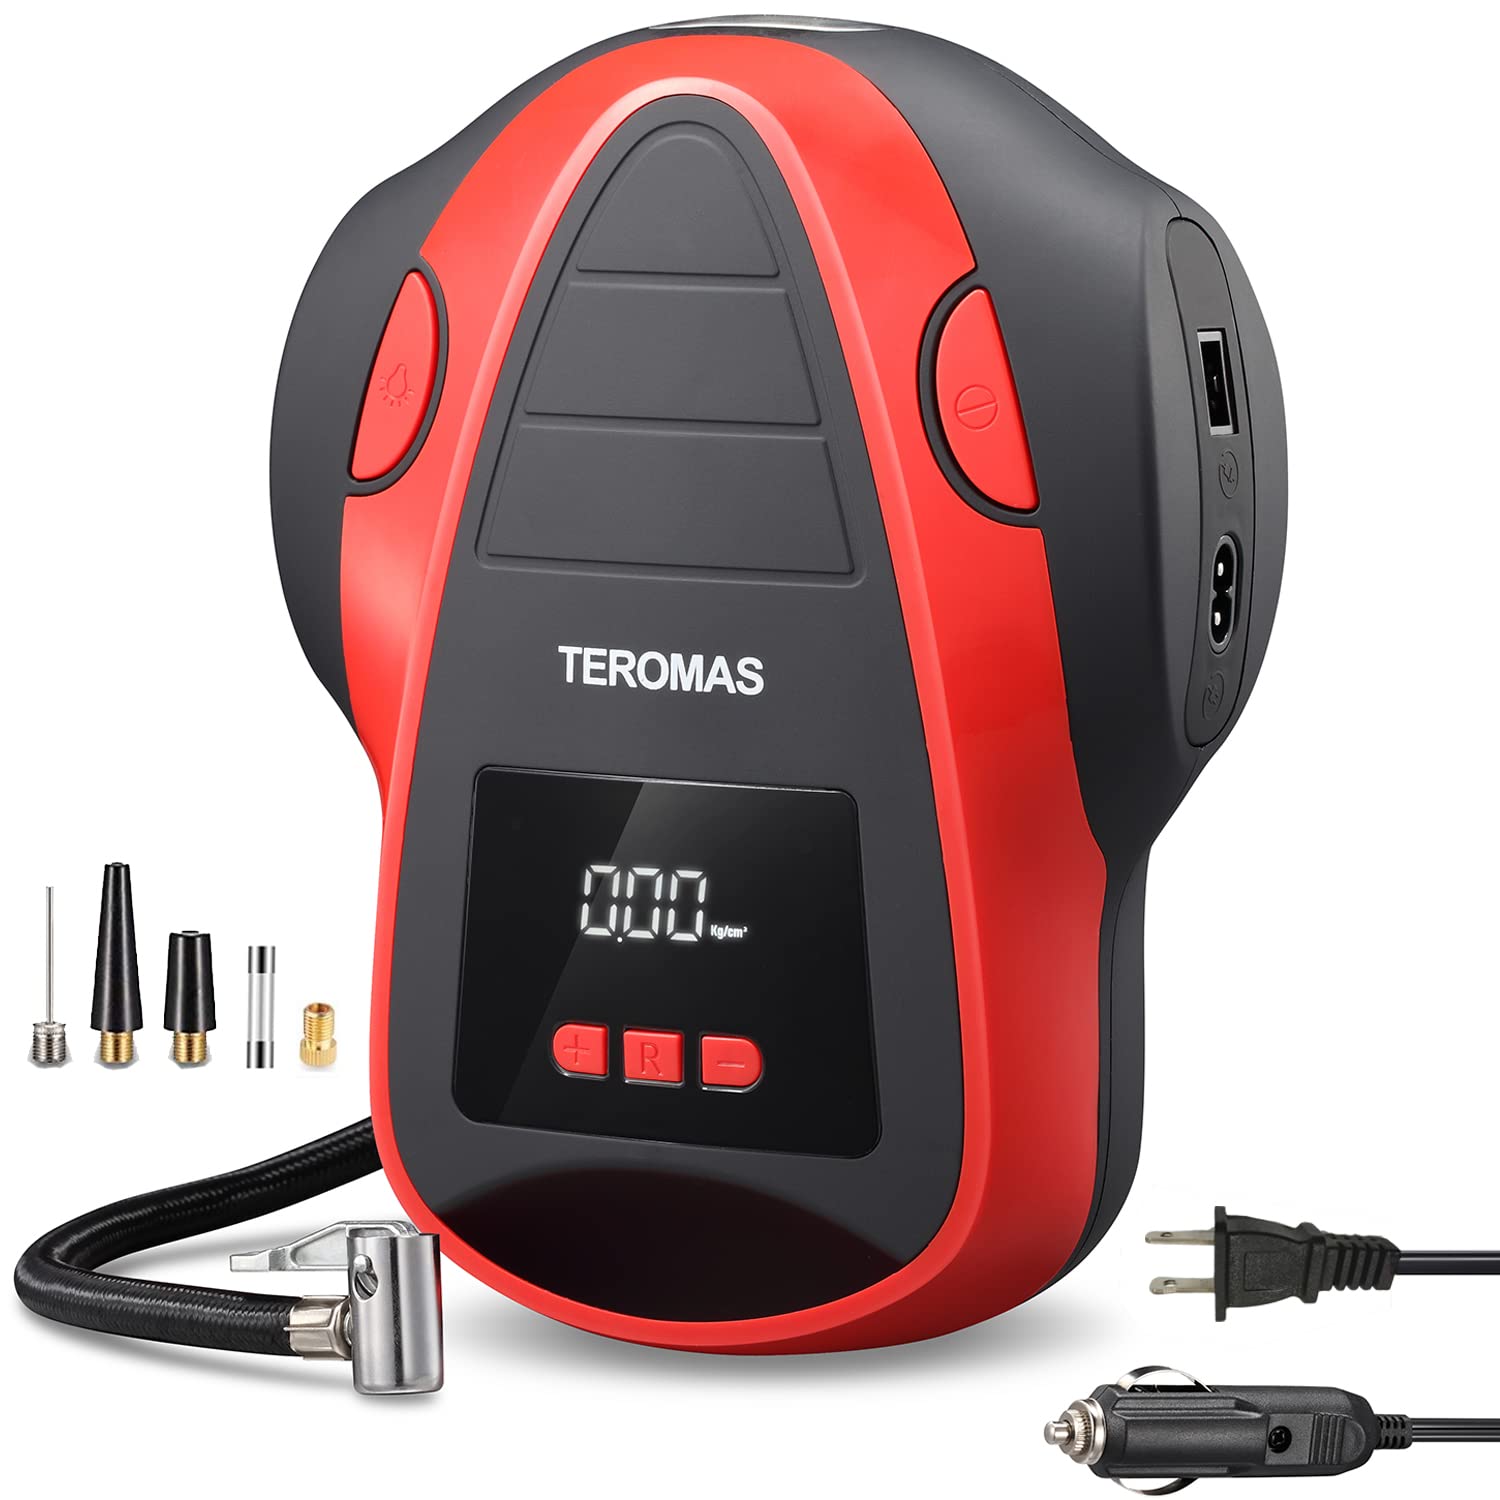 Teromas Tire Inflator Air Compressor, Portable Dcac Air Pump For Car Tires 12V Dc And Other Inflatables At Home 110V Ac, Digital